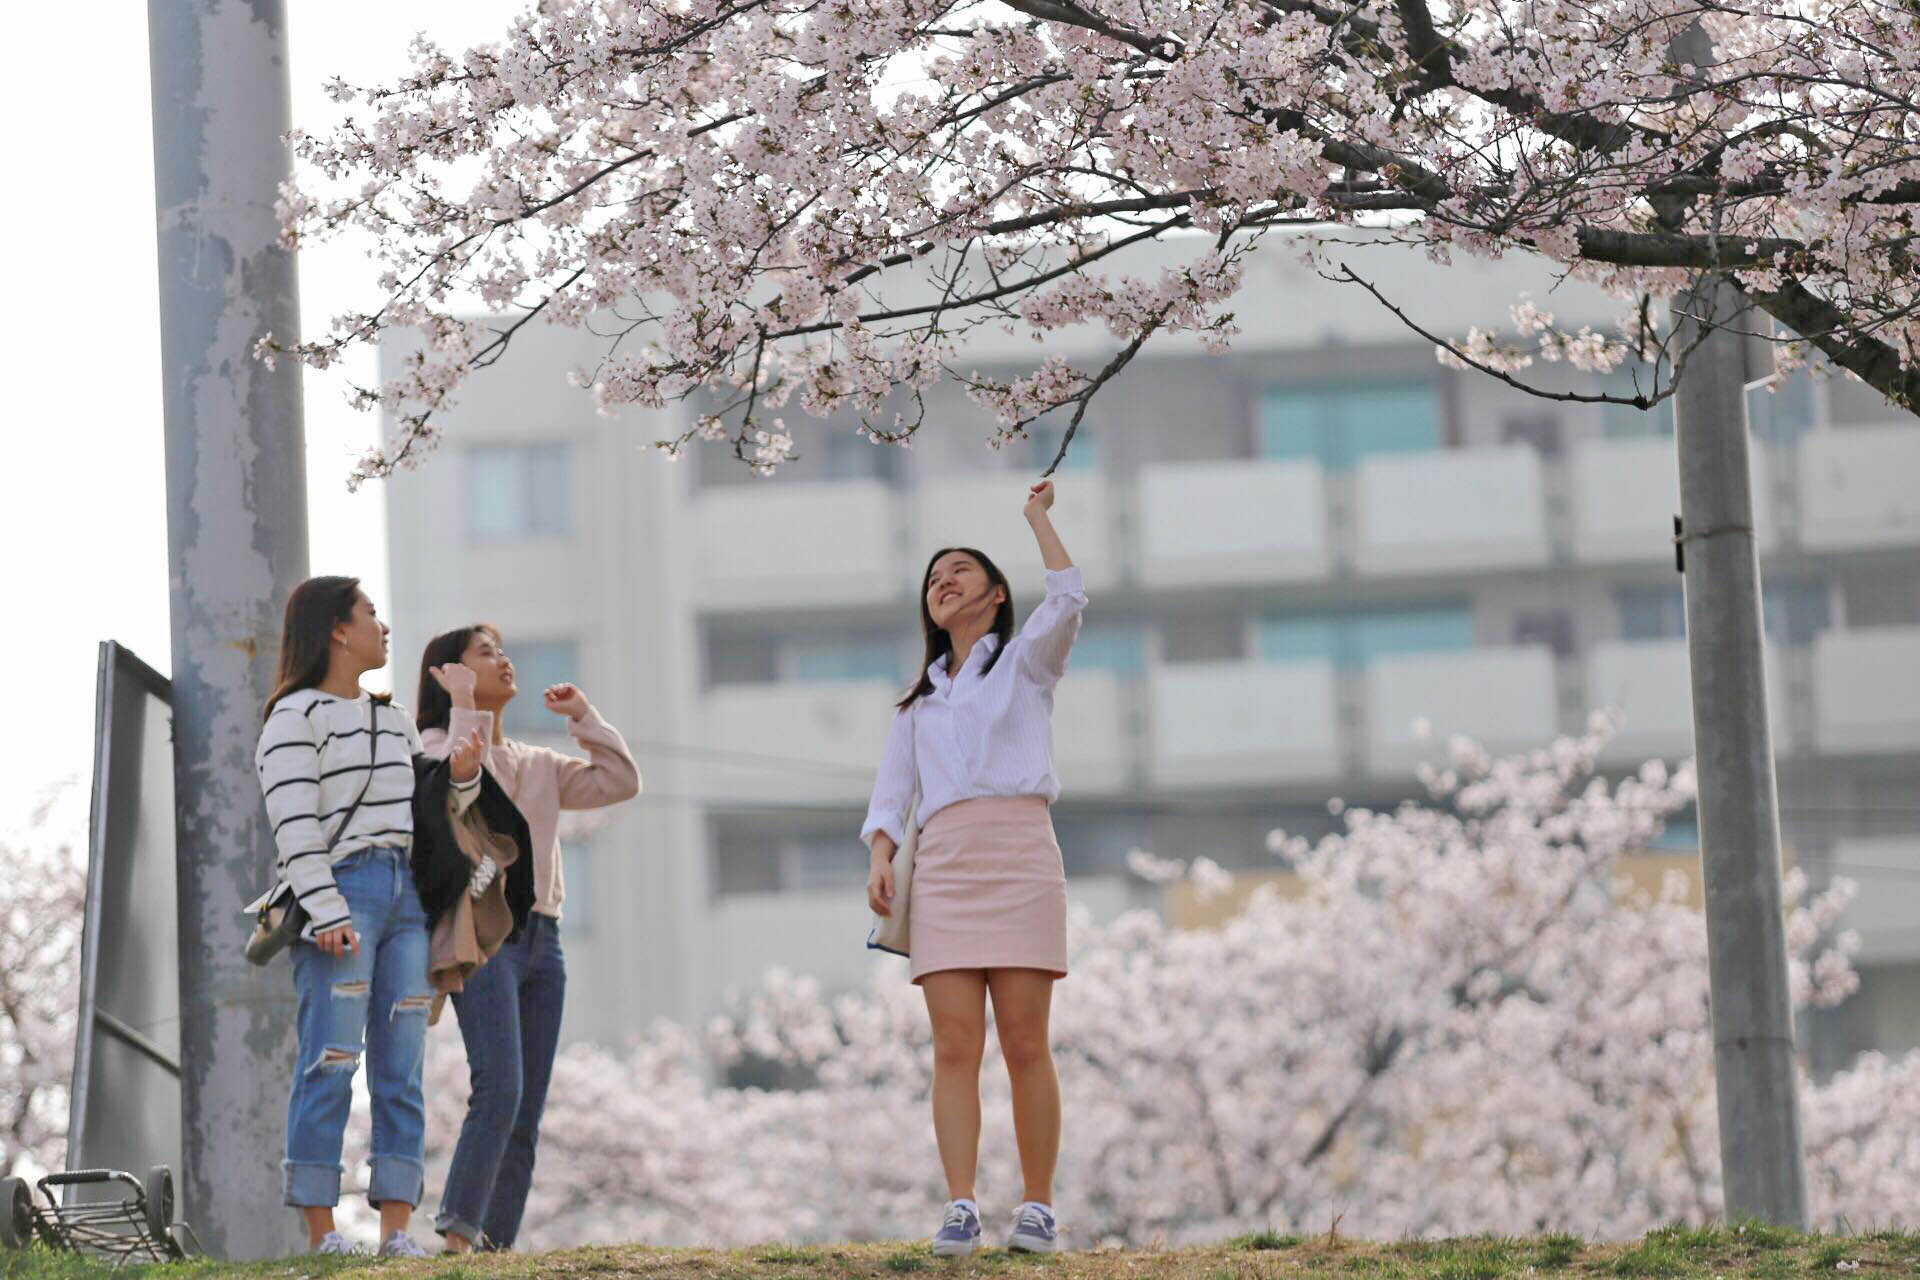 Plan your Cherry Blossom trip now - 2019 Korea Cherry blossom blooming forecast